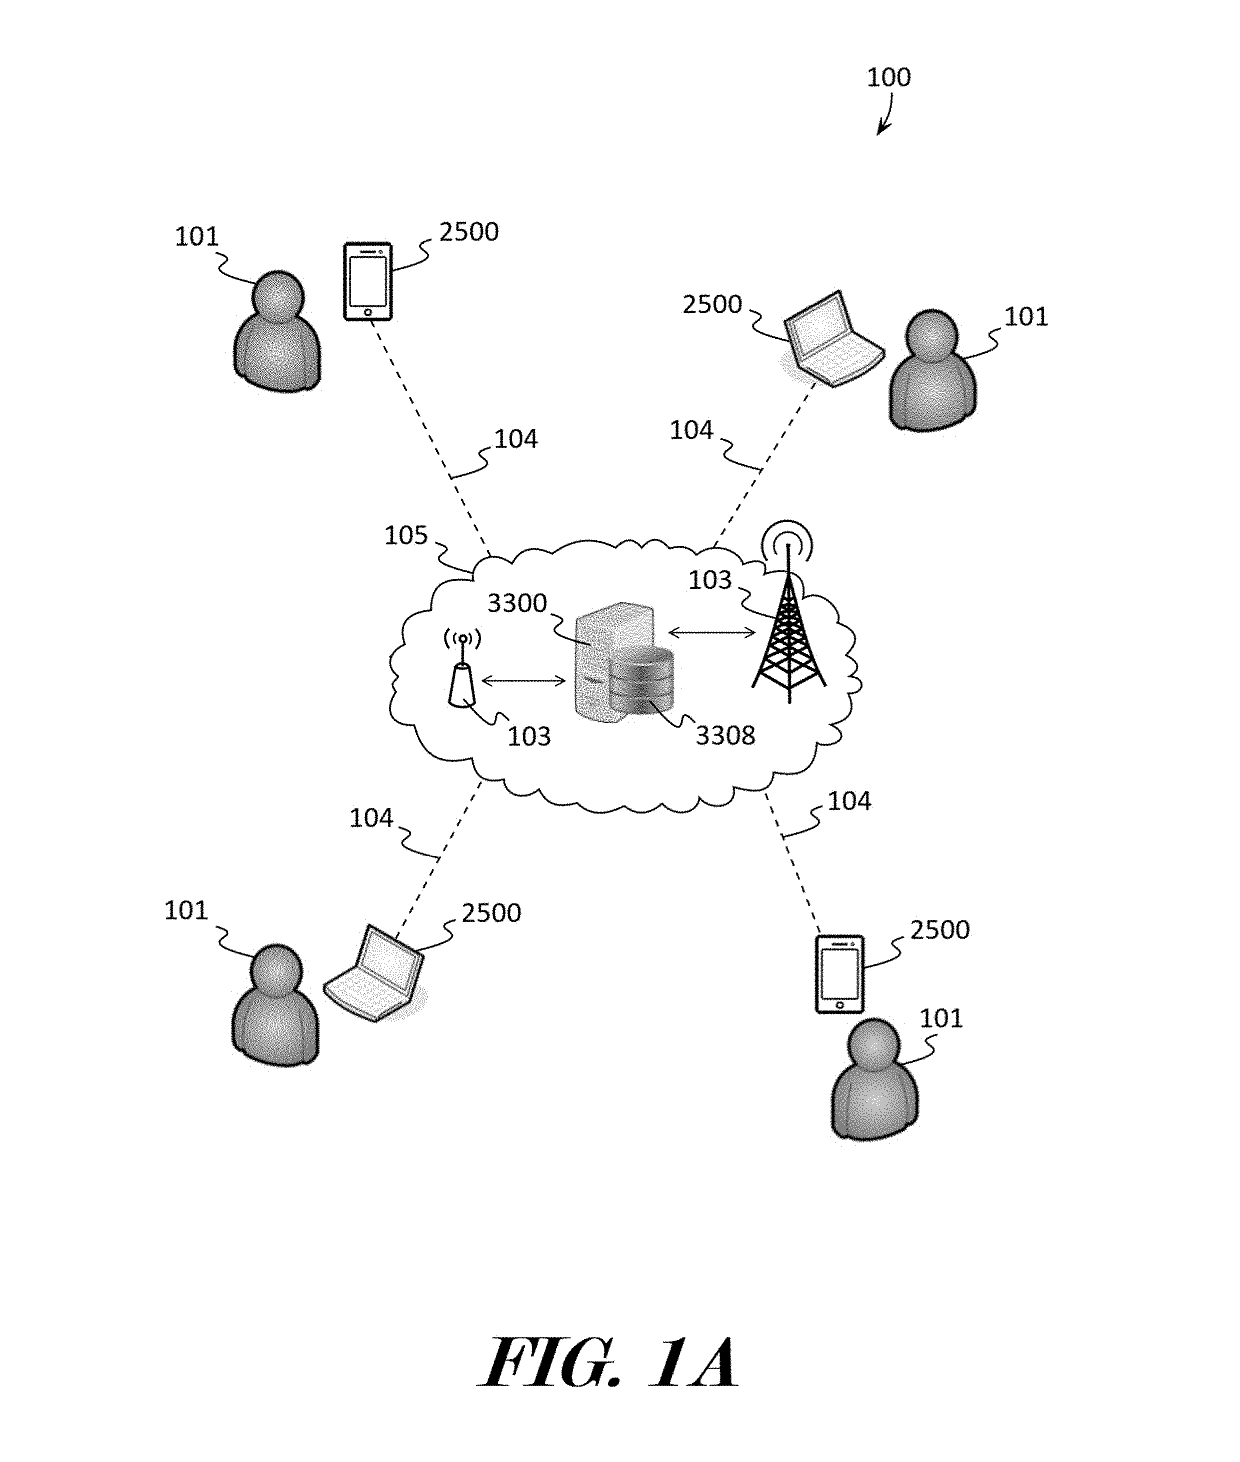 System and methods for development of visual business applications